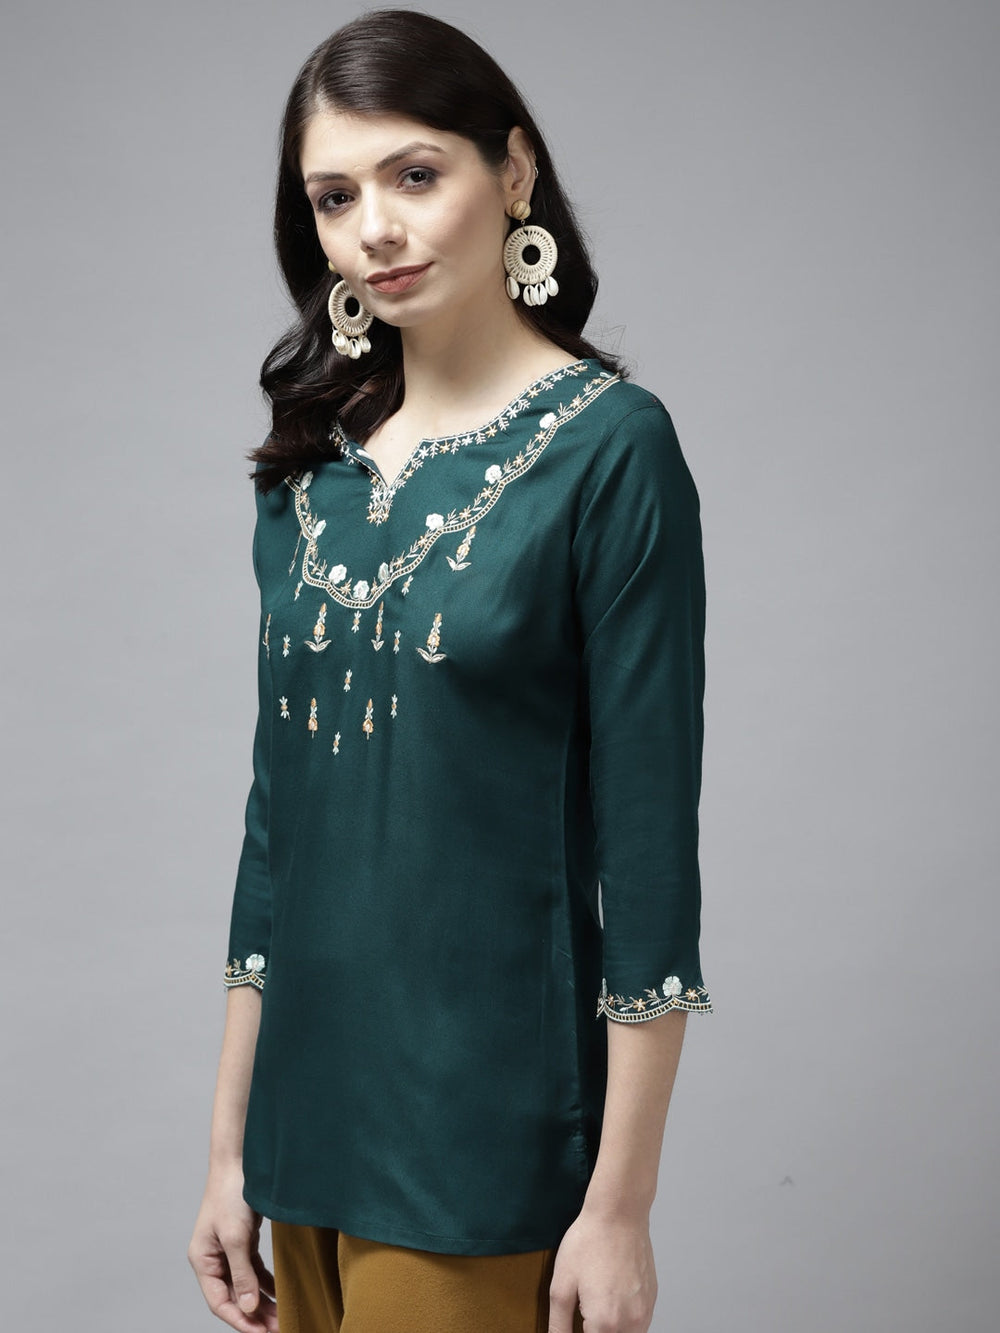 Green Embroidered Top-Yufta Store-9642TOPGRS